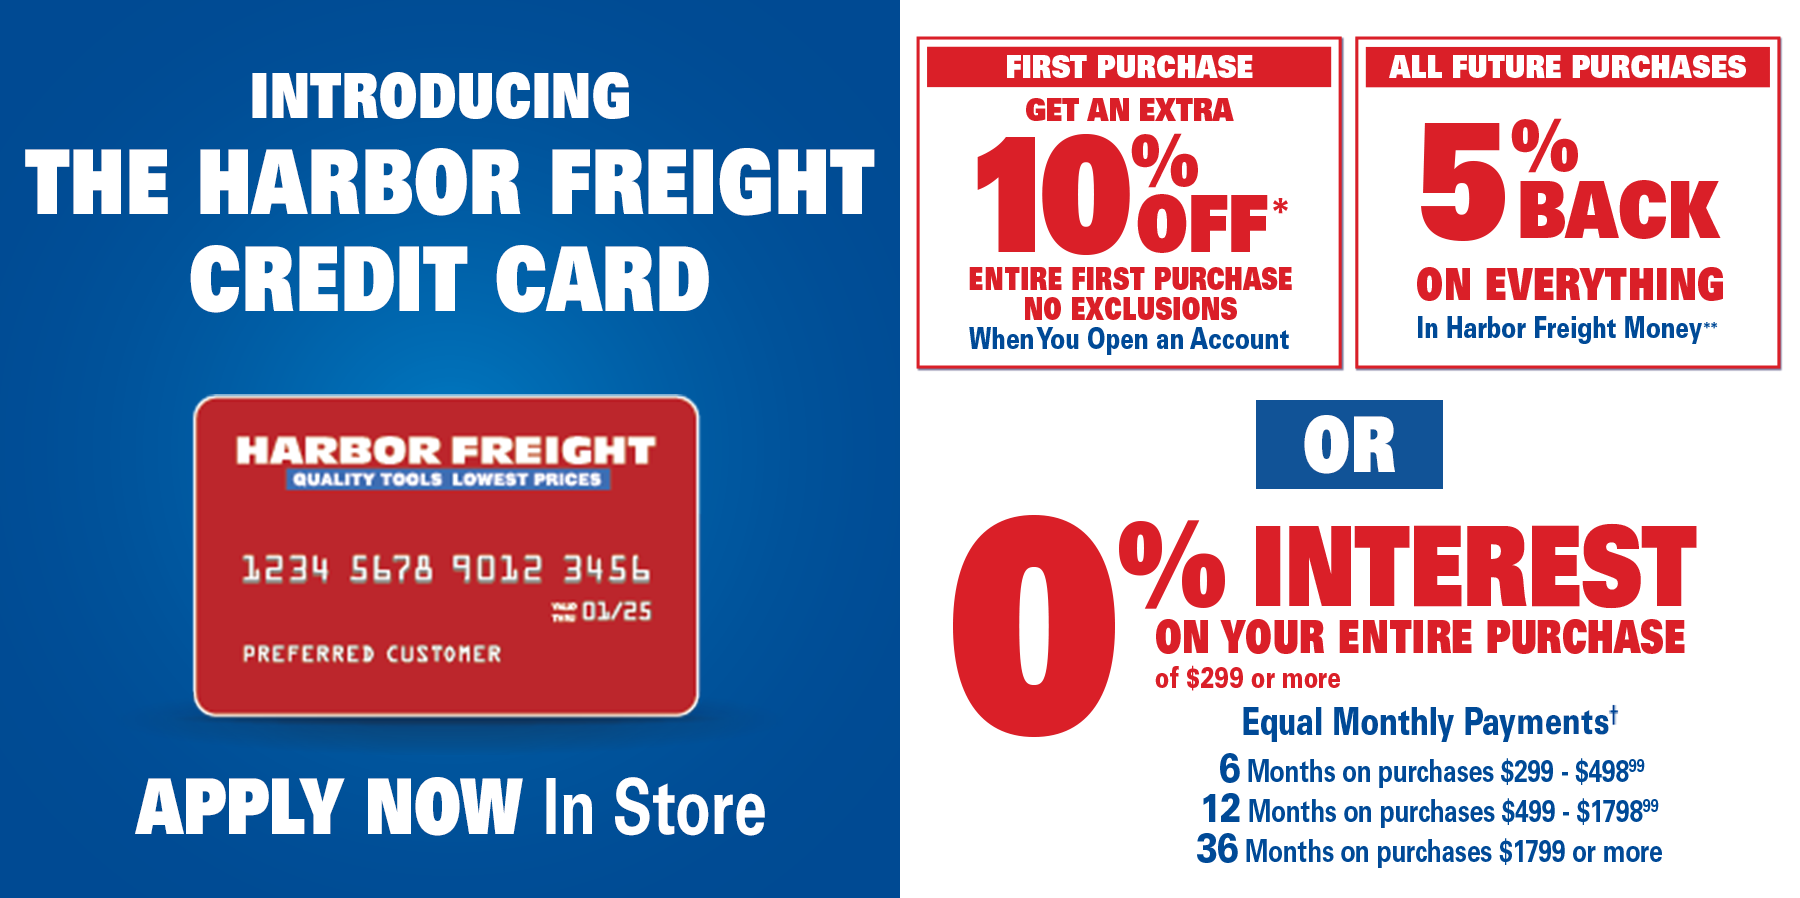 What Forms Of Payment Does Harbor Freight Tools Accept? Harbor